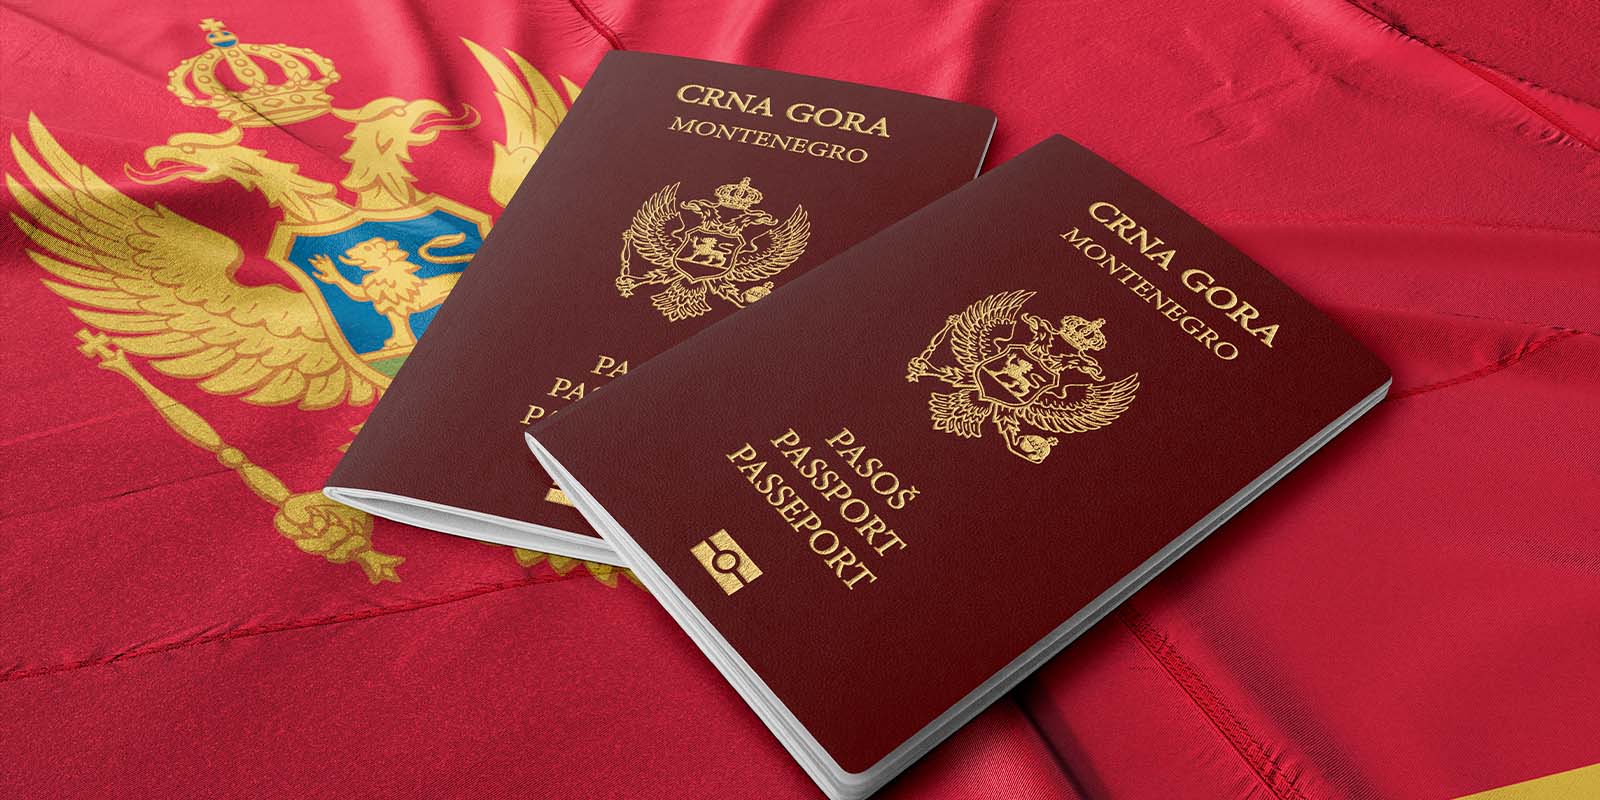 Montenegro extends its citizenship program by one year